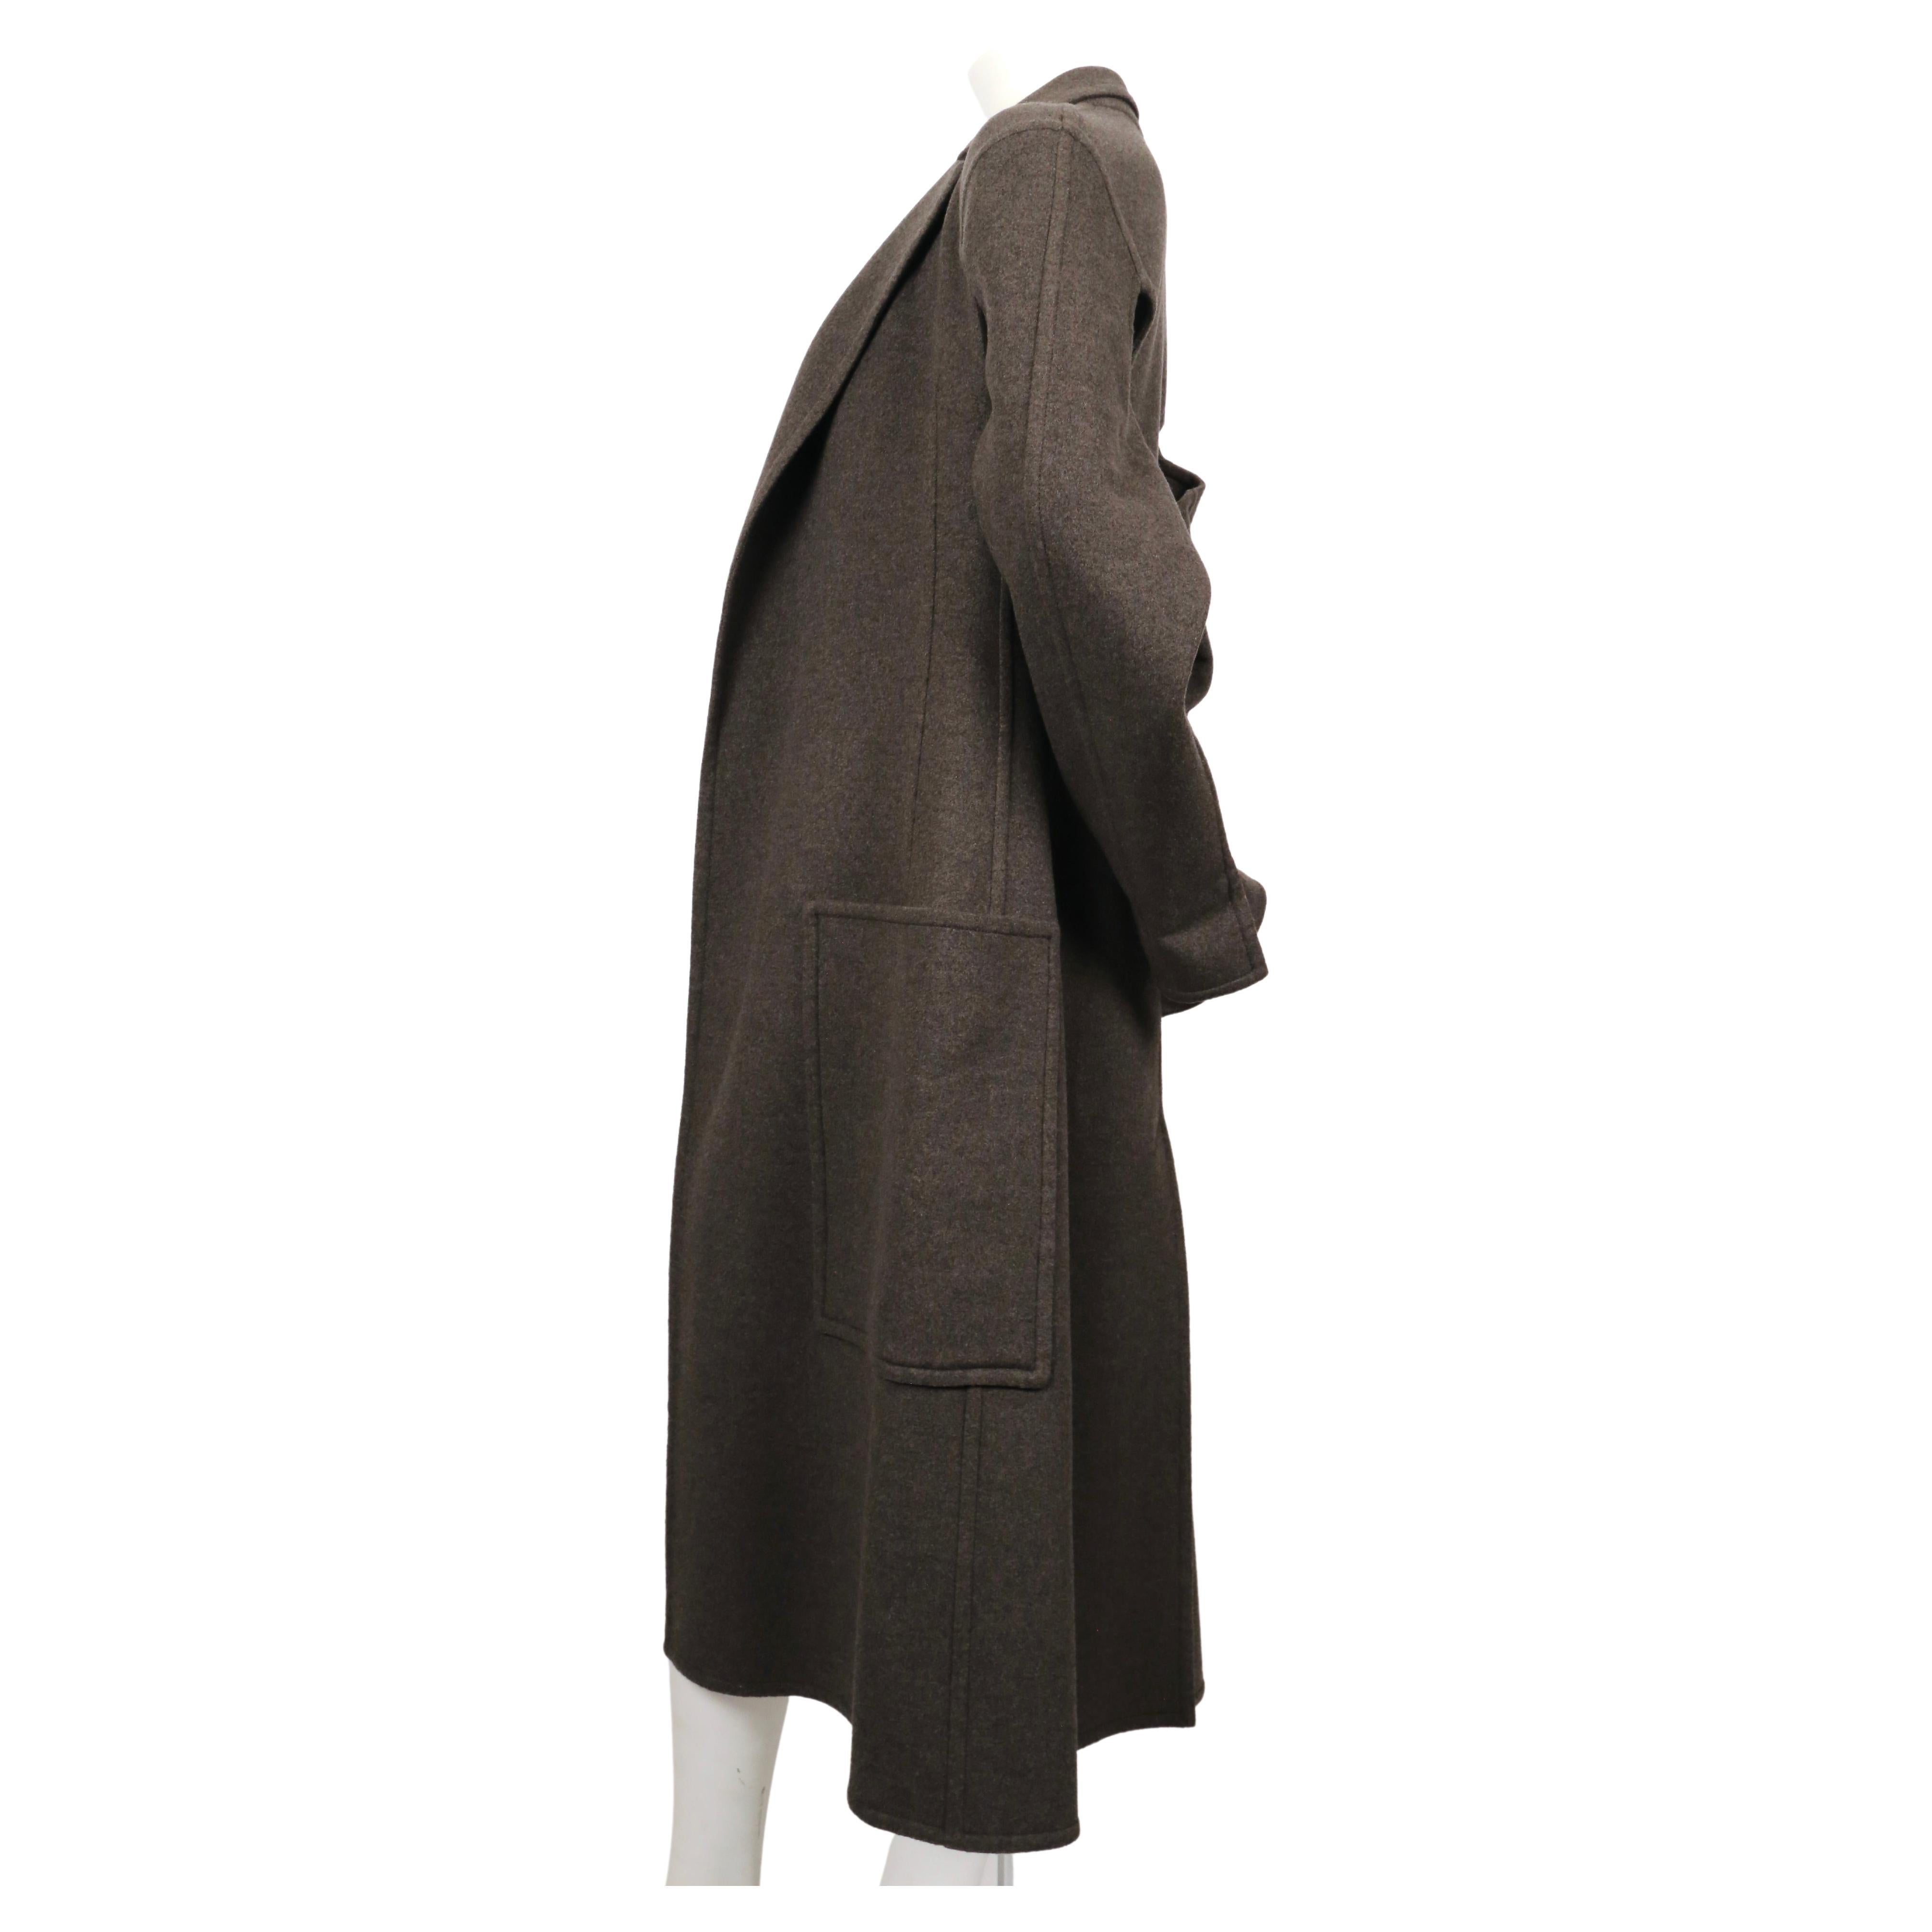 Celine by Phoebe Philo heathered grey cashmere coat with cutouts & wrap pockets In New Condition For Sale In San Fransisco, CA